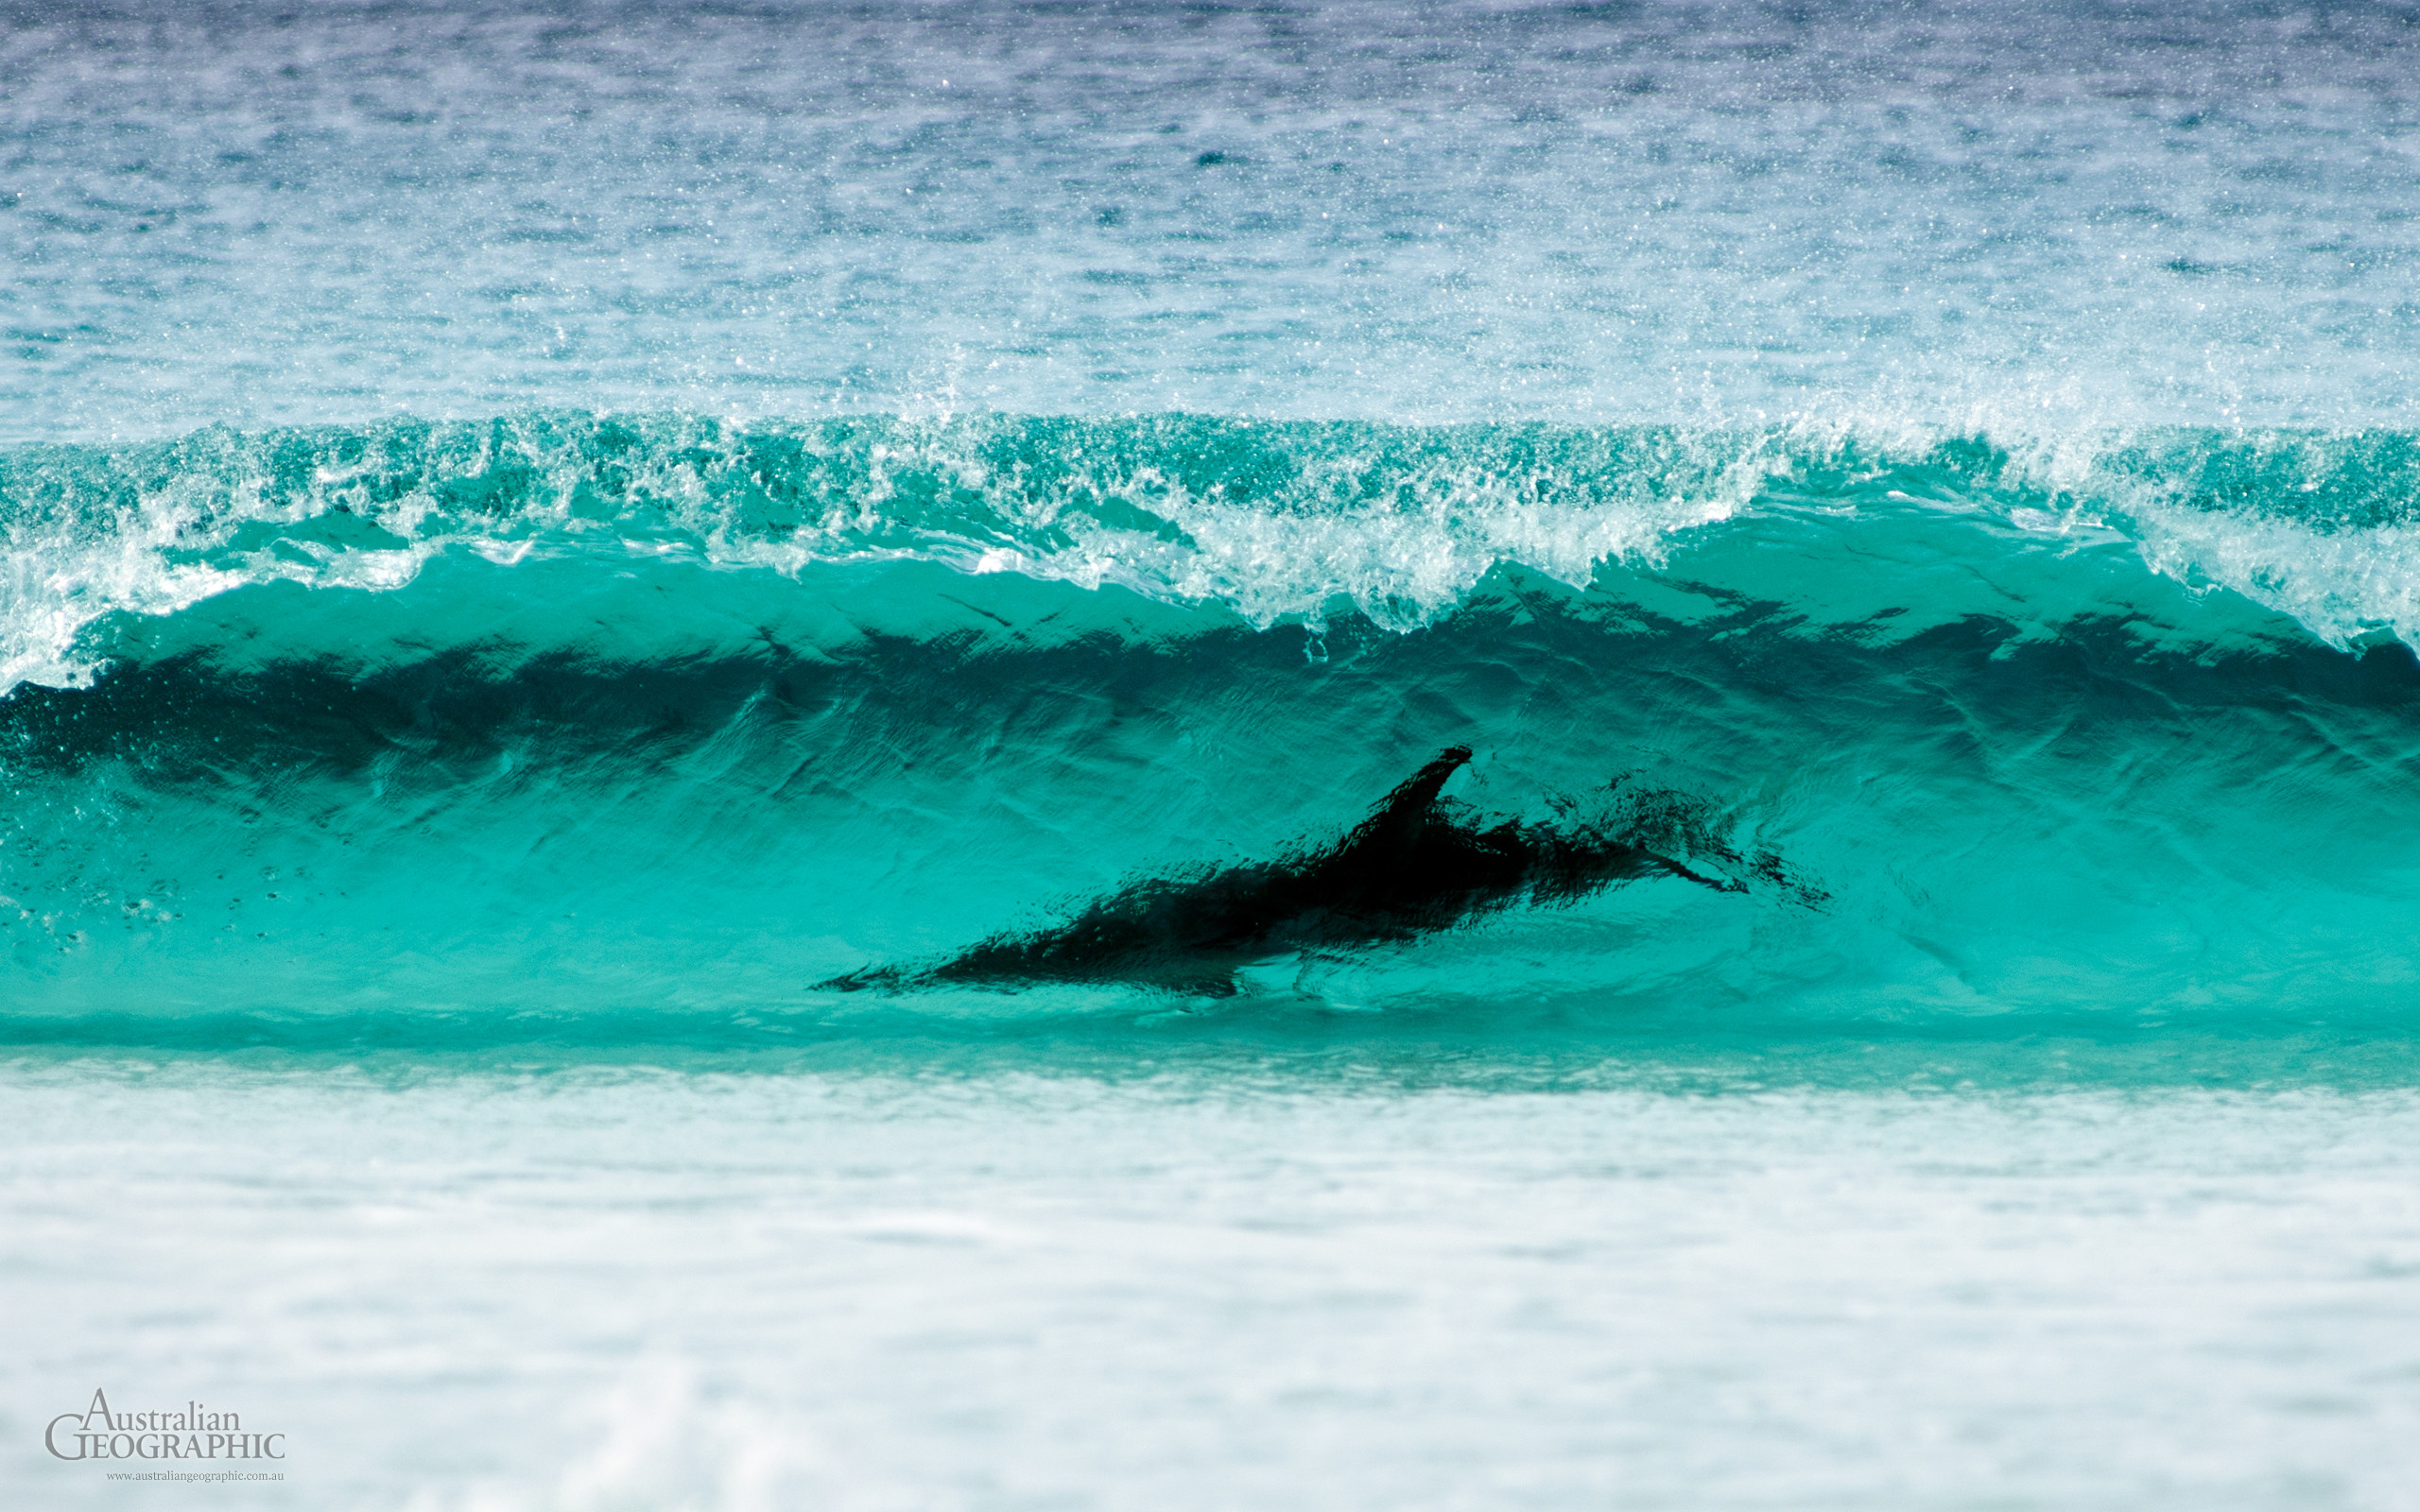 Wallpapers. Images of Australia Surfing dolphin, Cape Le Grand NP, Western Australia